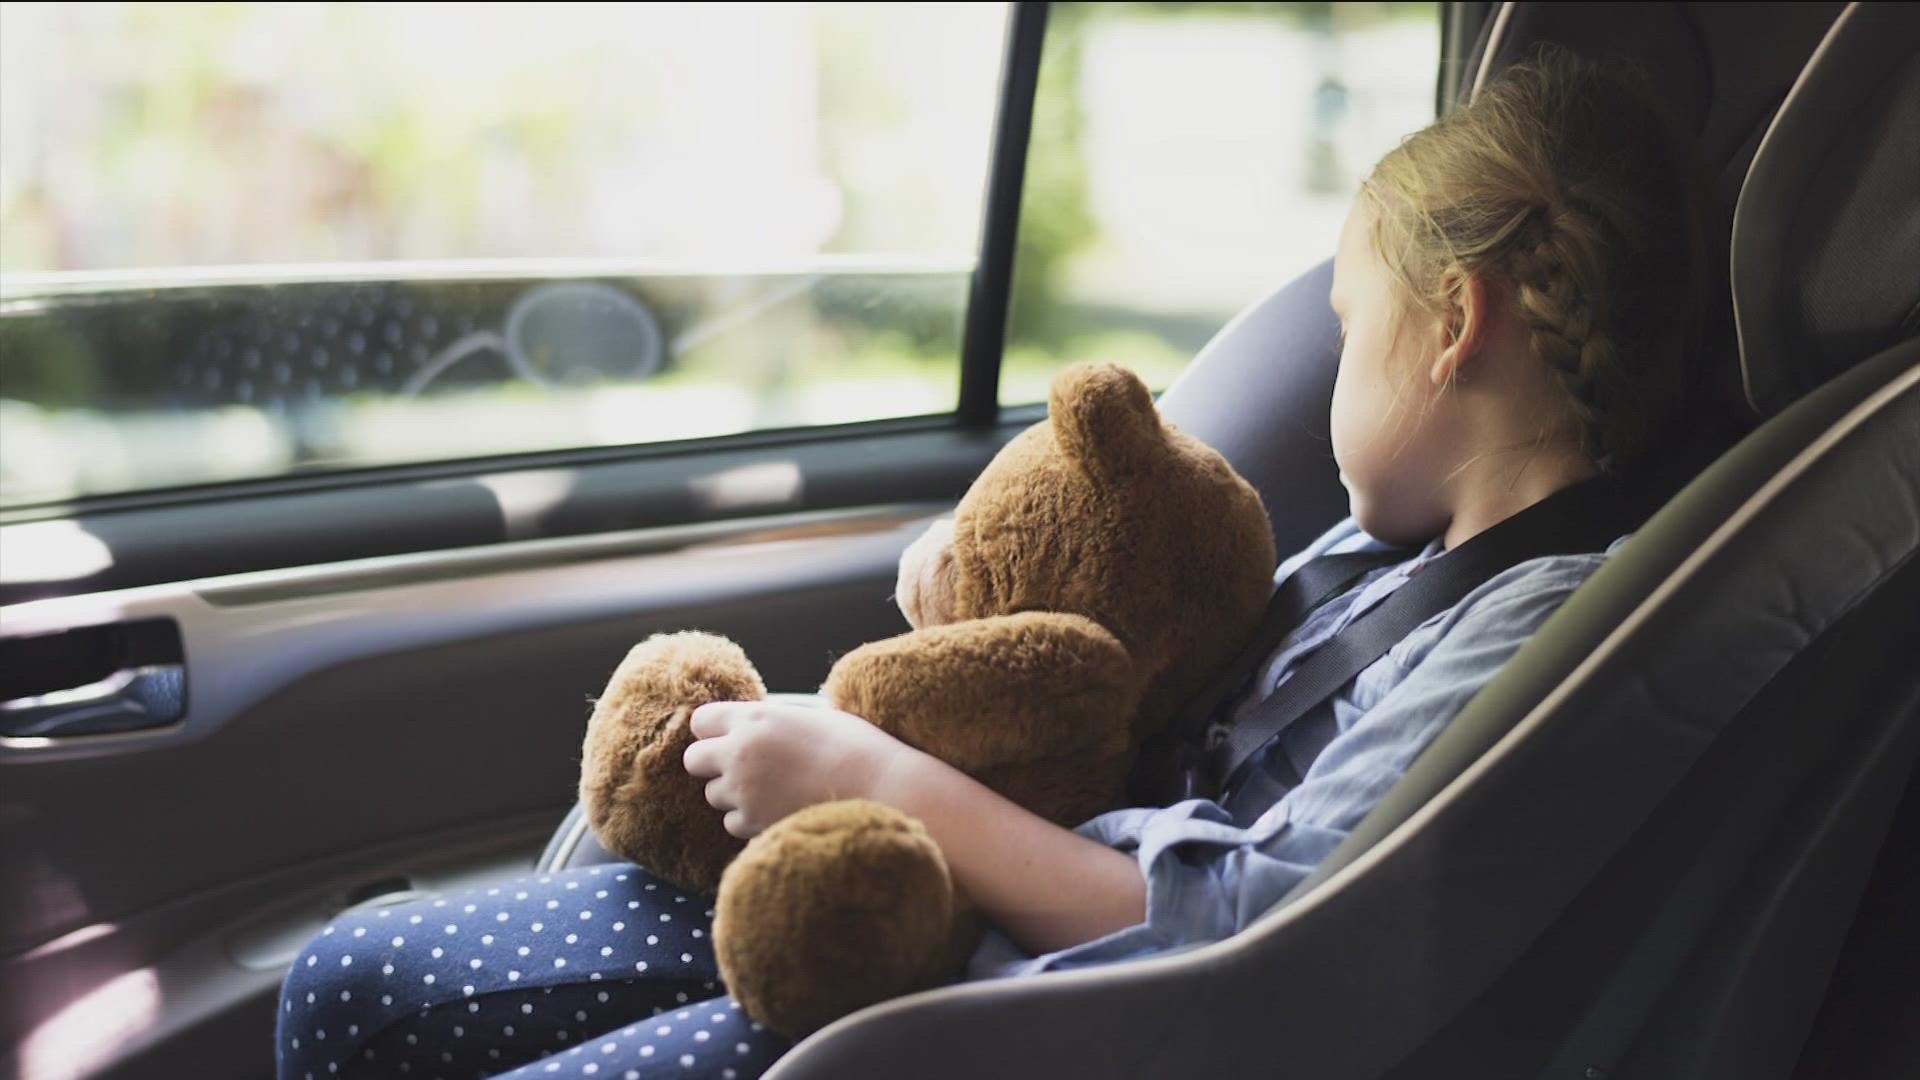 Lucas County children services Is advising parents and caregivers to beat the heat and check the back seat